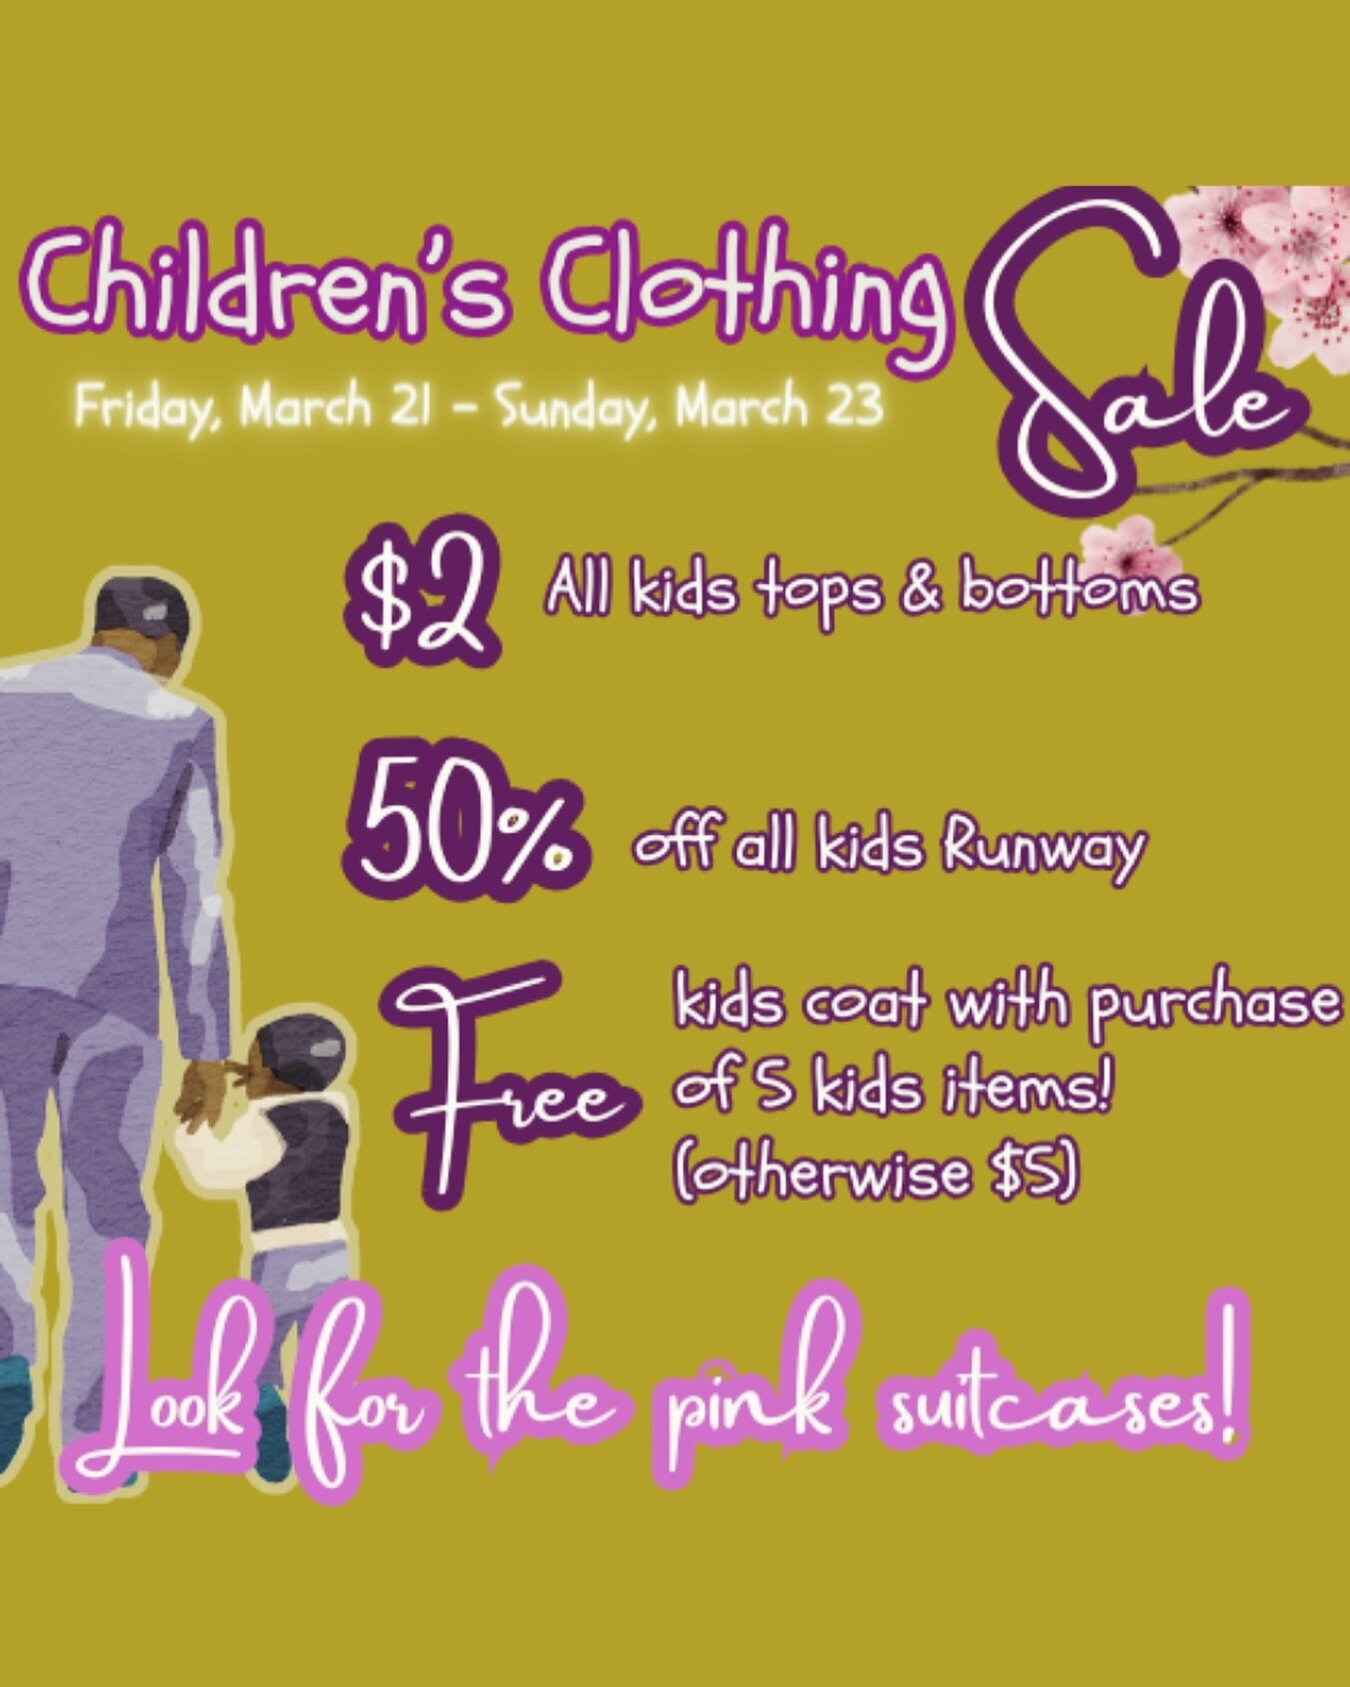 🌟 Exciting News! 🌟

Get ready for some serious savings on adorable kids&rsquo; clothing at Graffiti And Silk! Starting tomorrow through the weekend, we&rsquo;re having a massive sale you won&rsquo;t want to miss!

👚 $2 tops and bottoms for your li